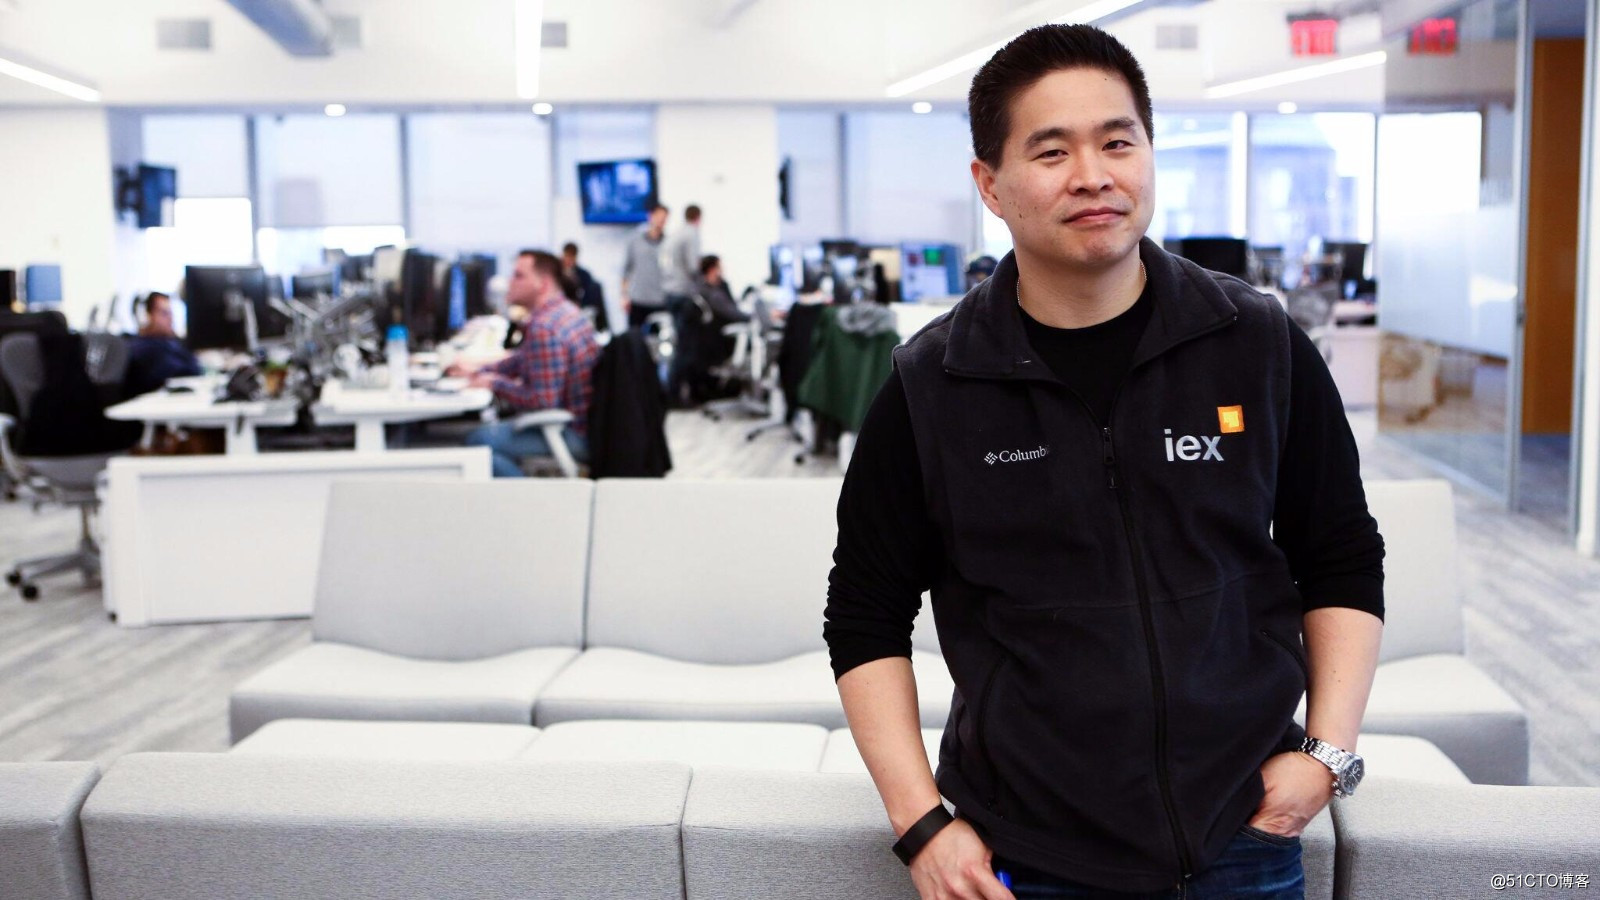 IEX- with Interactive Brokers Interactive Brokers listed on the IEX exchange, always failed